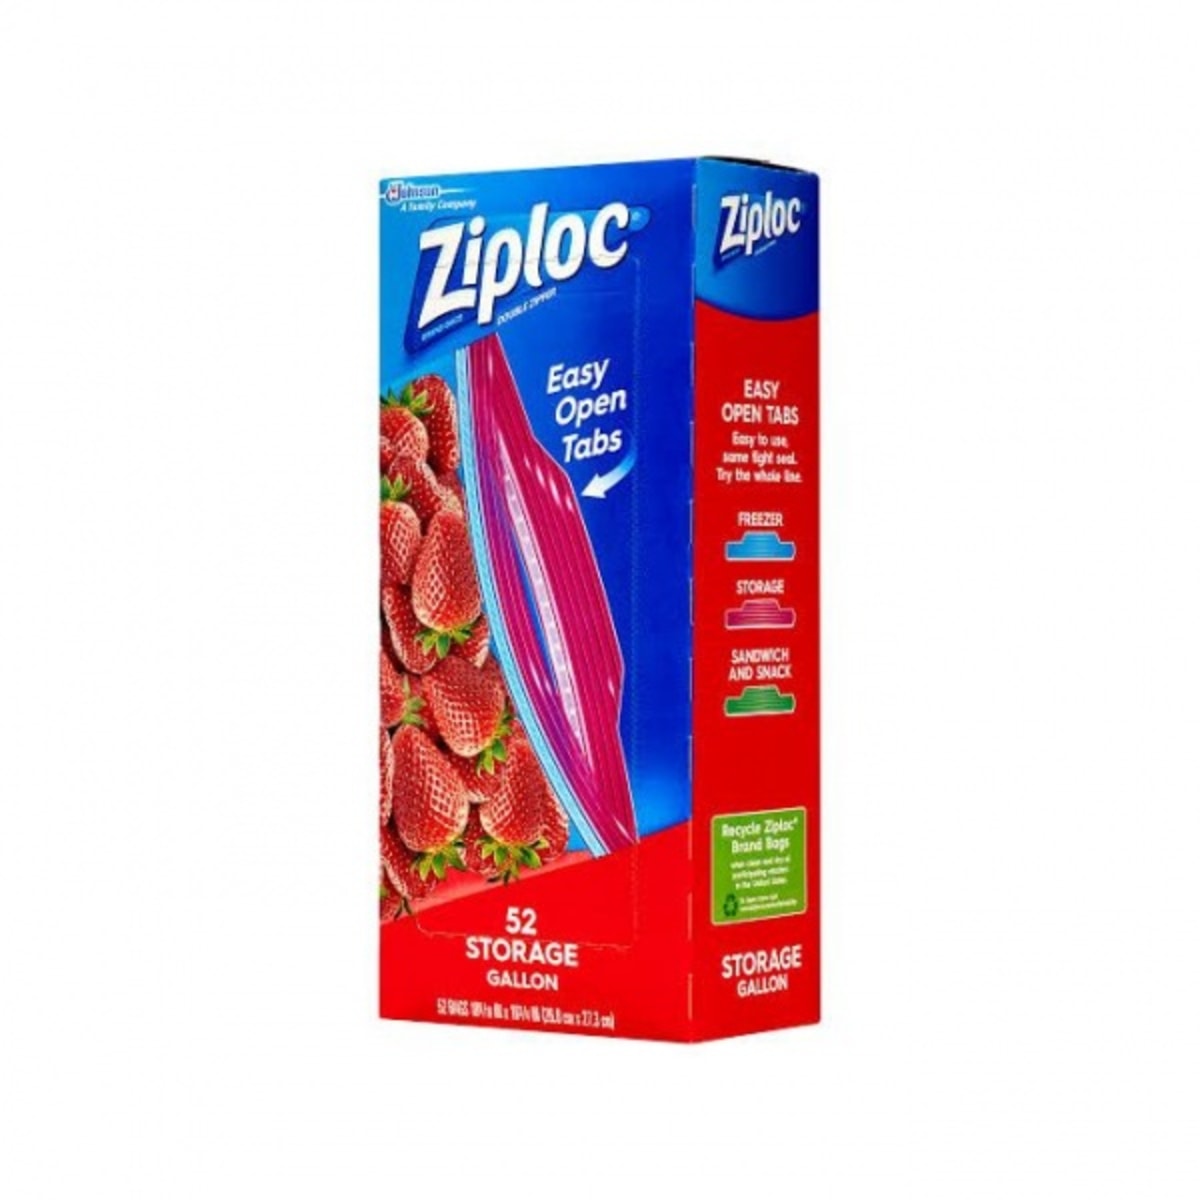 Ziploc Brand Storage Bags with New Stay Open Design Gallon 60 Count  Patented Standup Bottom Easy to Fill Food Storage Bags Unloc a Free Set  of Hands in the Kitchen Microwave Safe